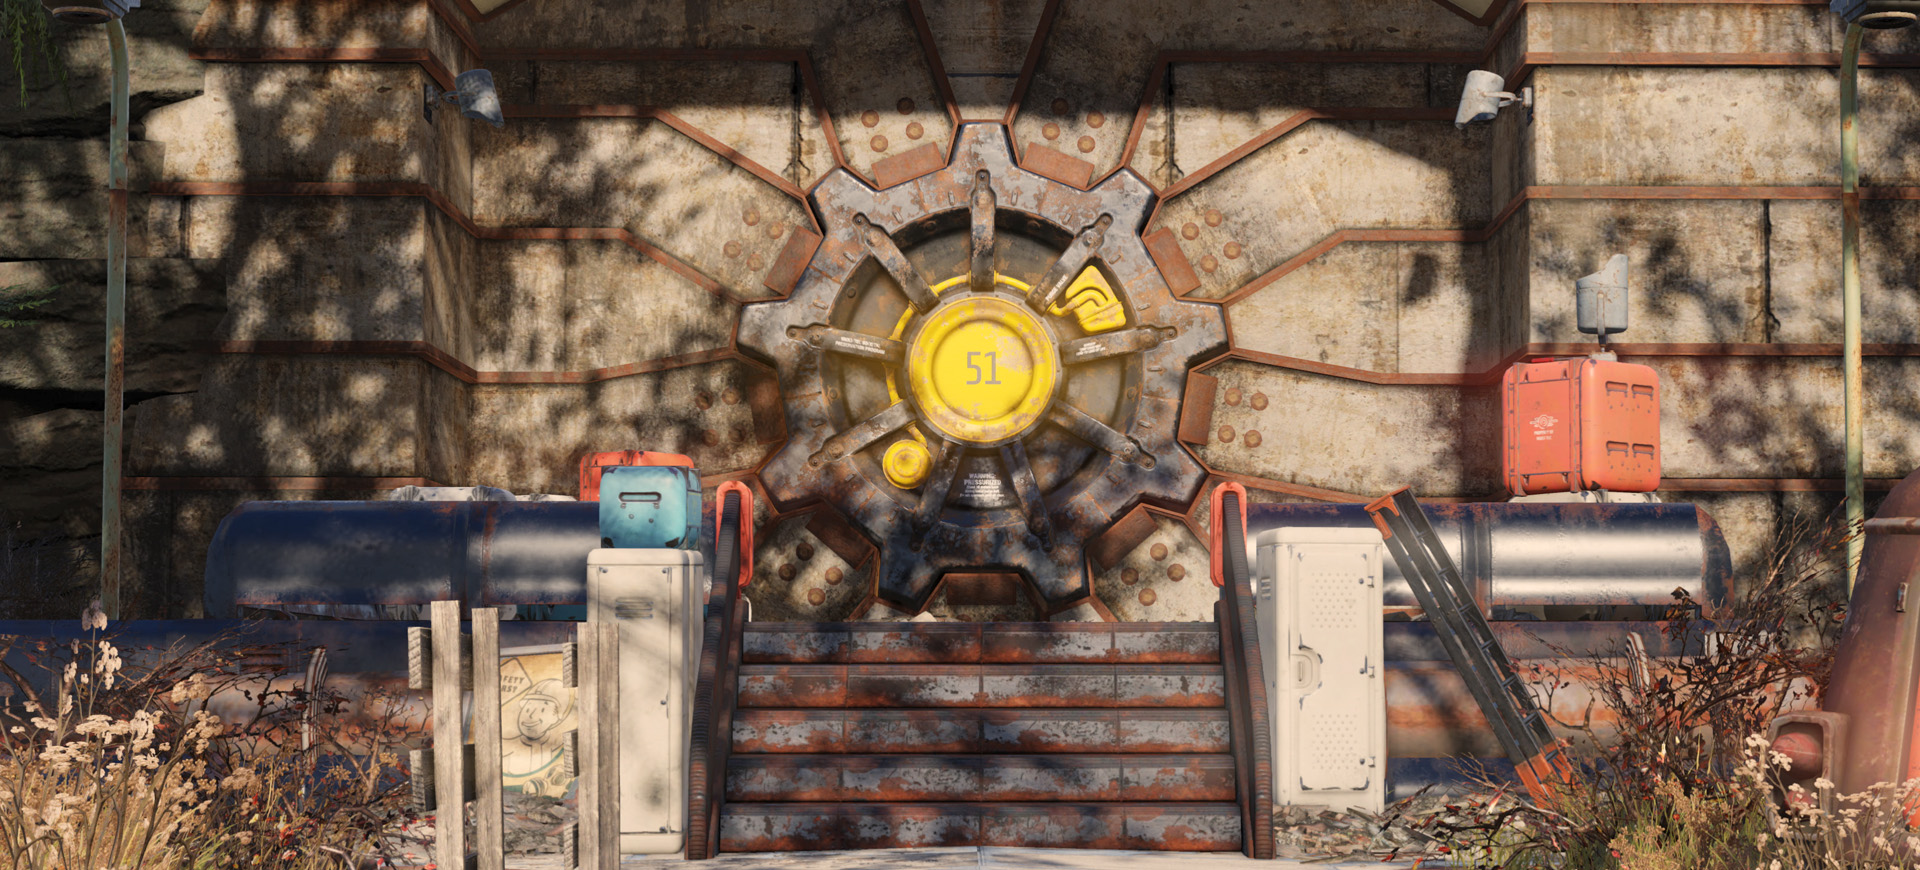 fallout 76 inside the vault